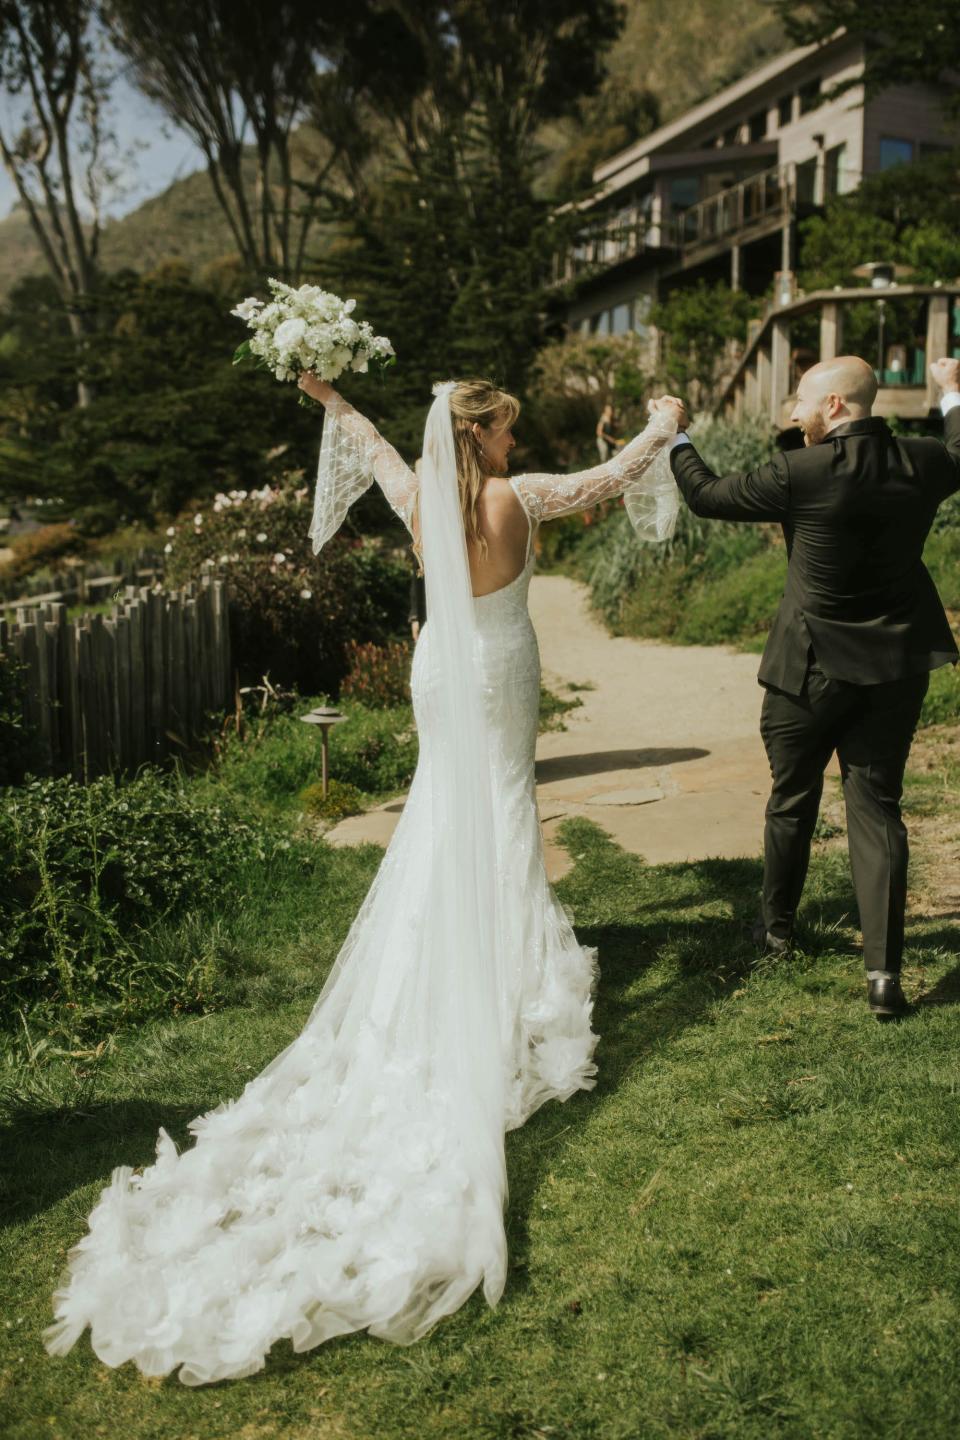 A bride and groom raise their arms in triumph as they leave their wedding ceremony.